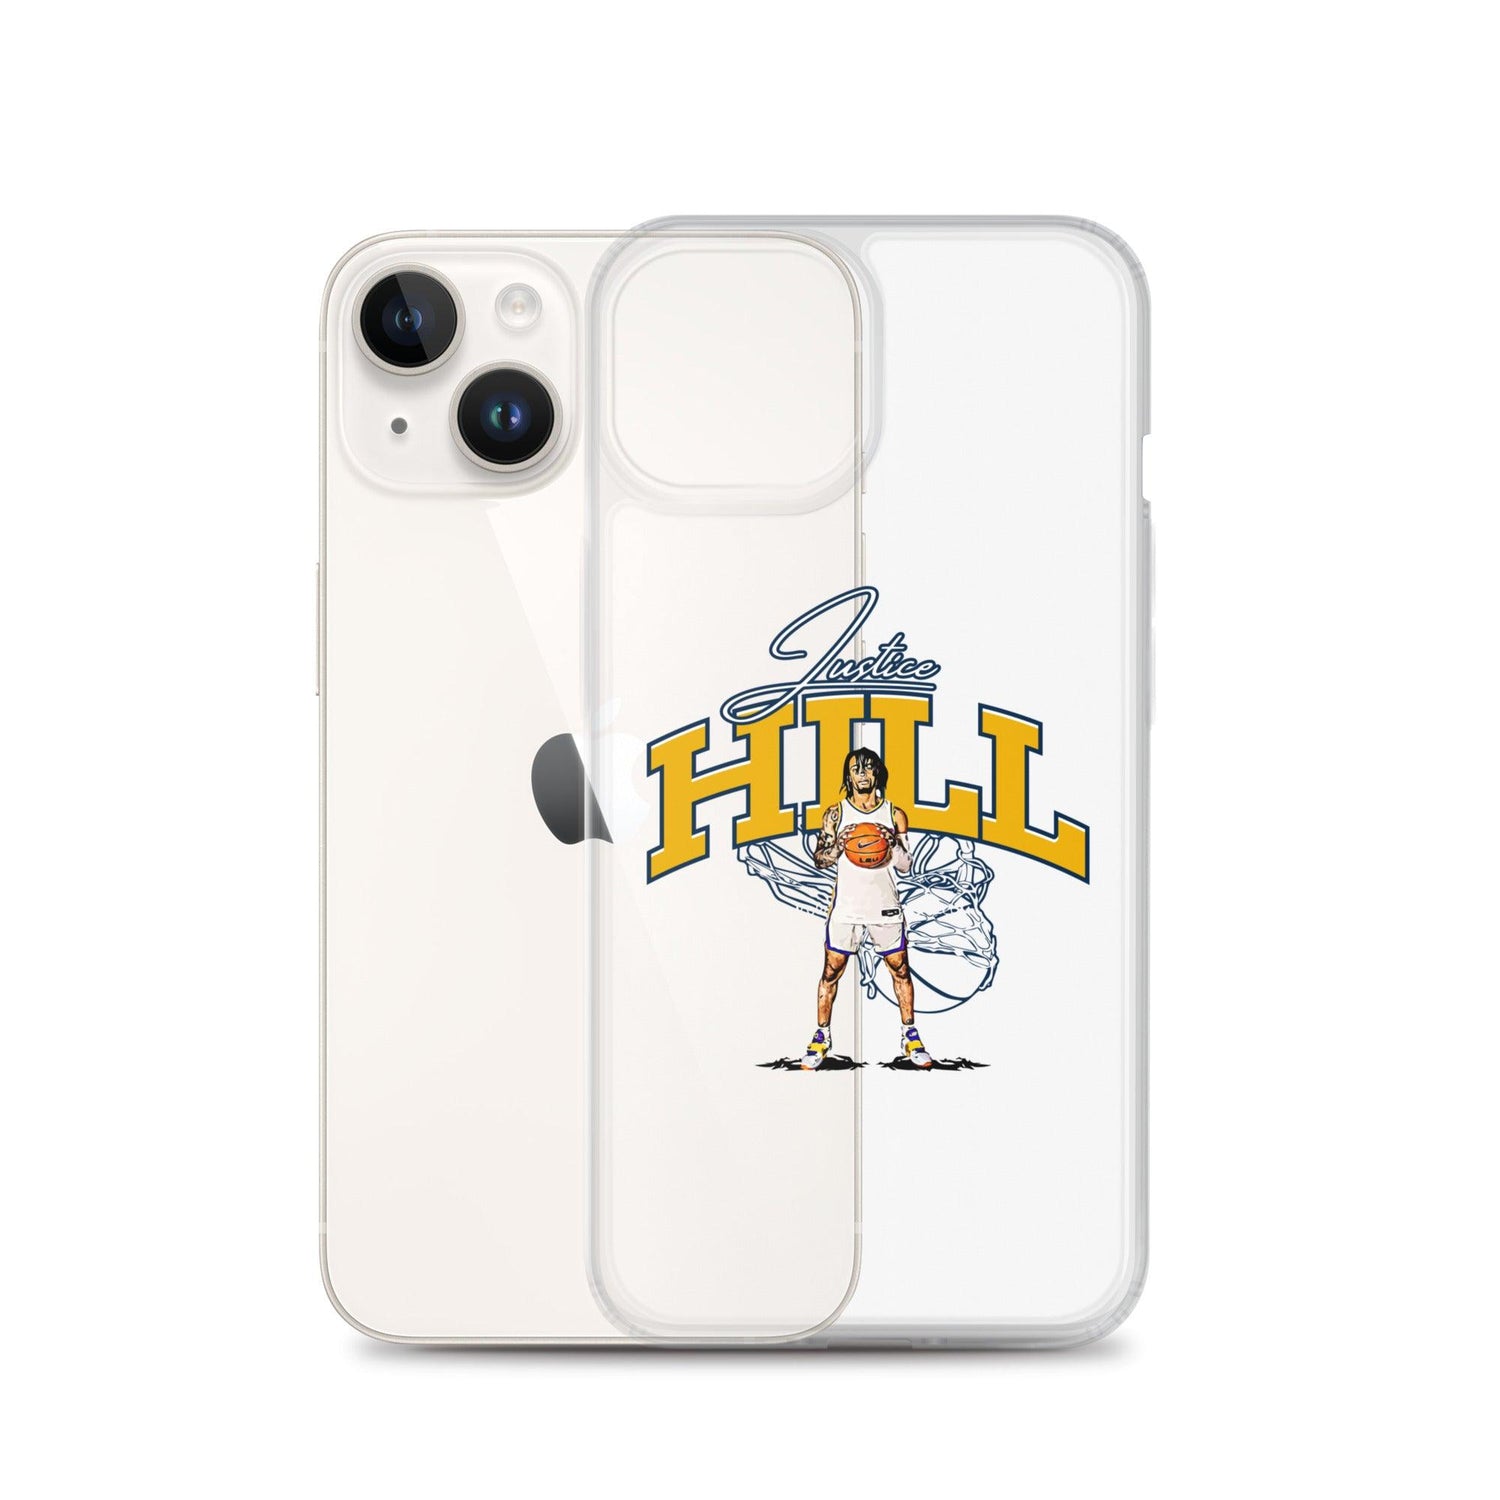 Justice Hill "Gameday" iPhone Case - Fan Arch